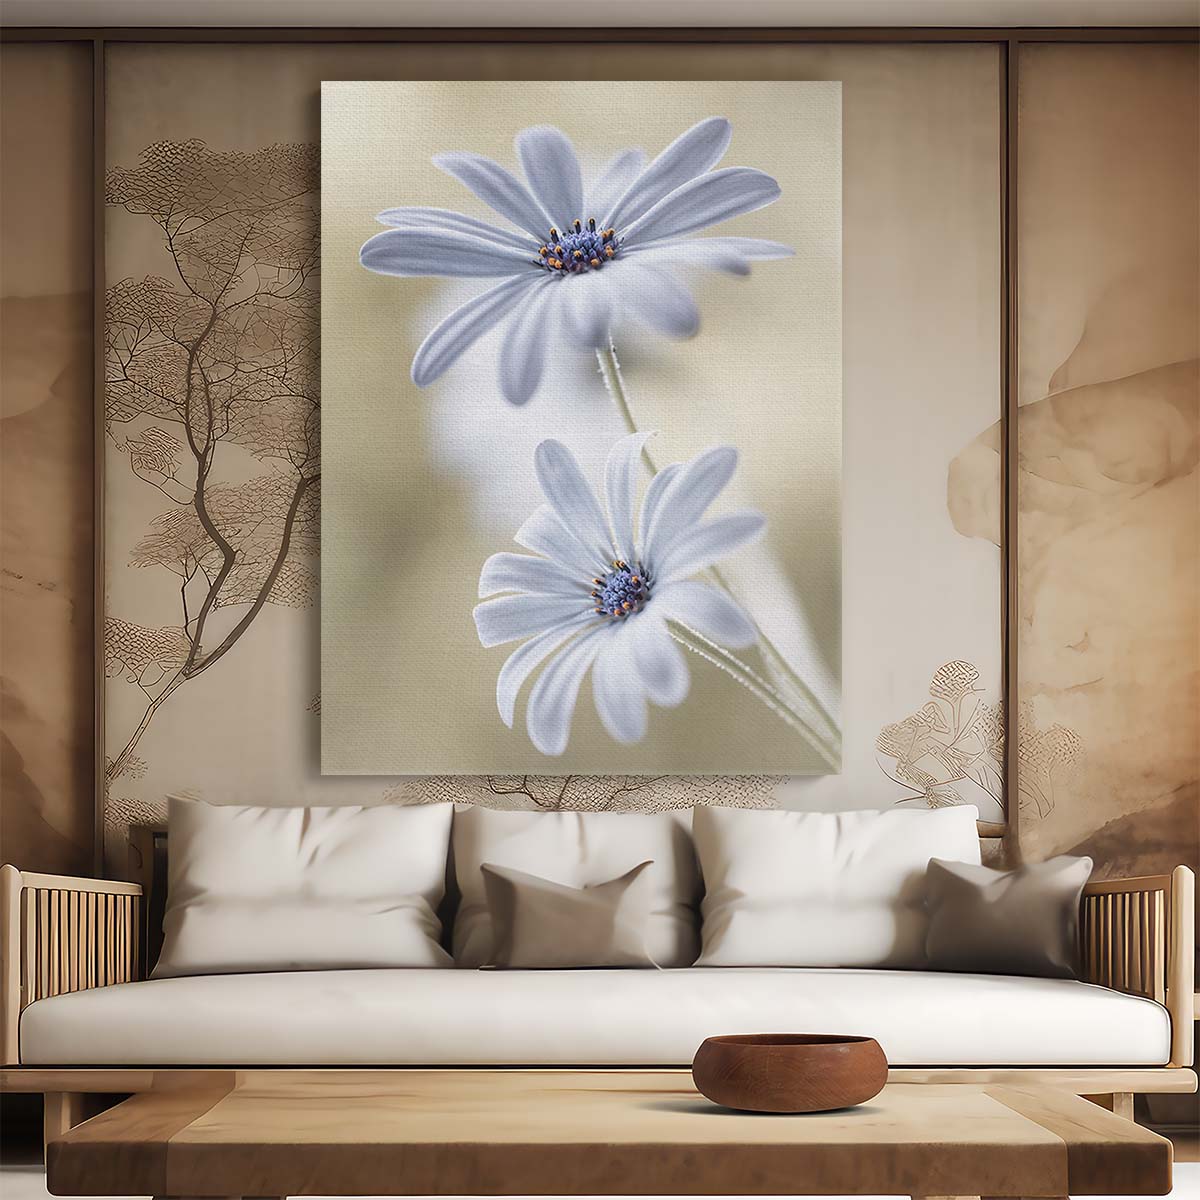 Delicate Macro Photography of Blue Cape Daisies by Mandy Disher by Luxuriance Designs, made in USA